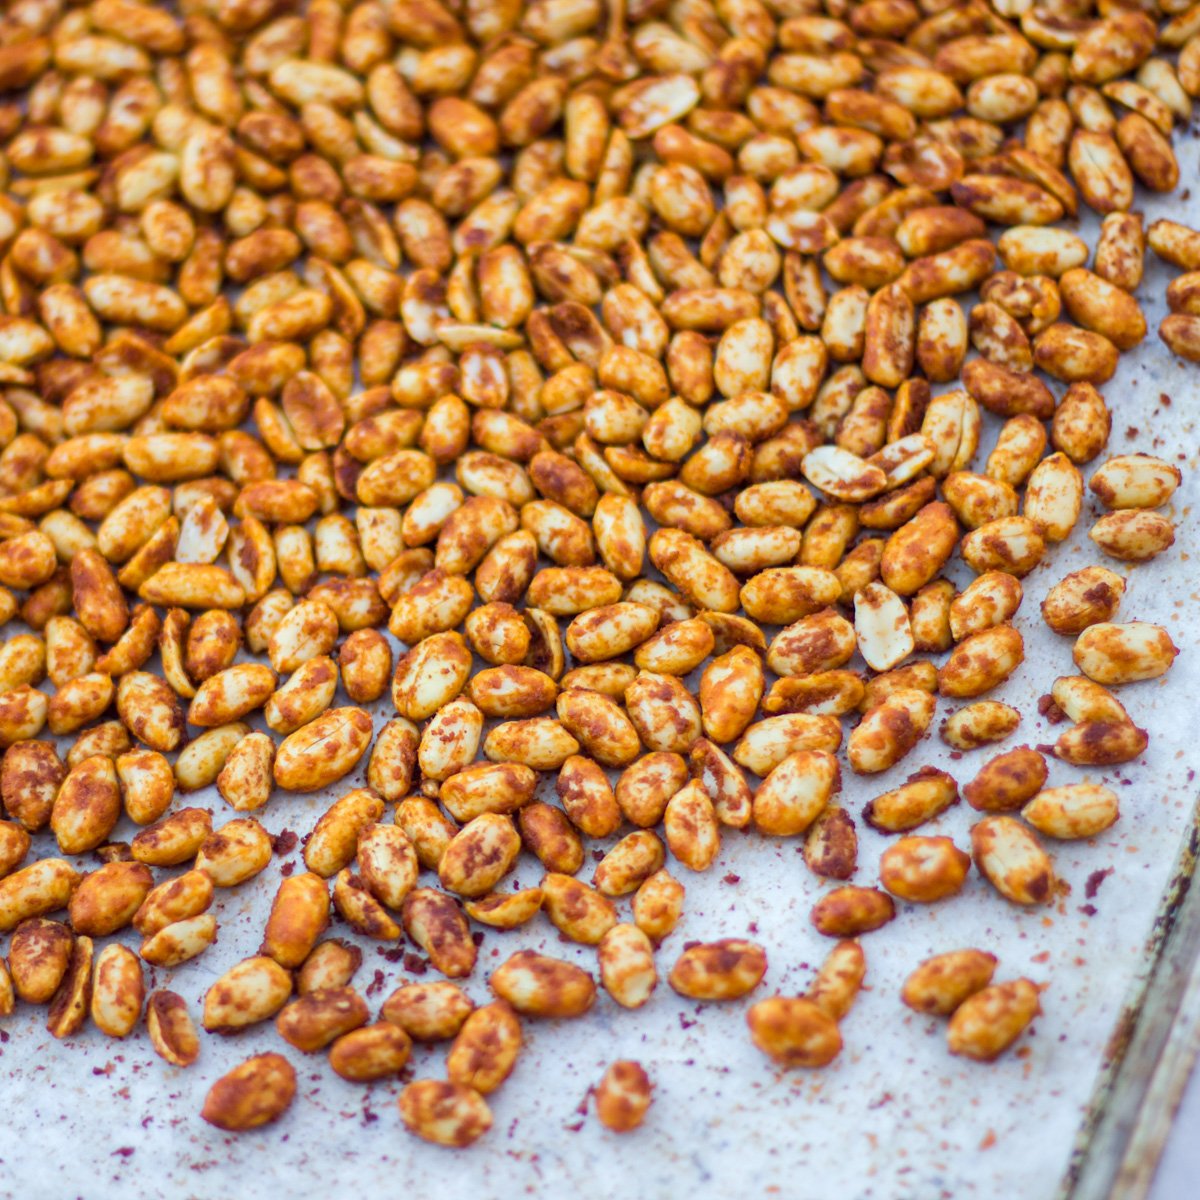 Overhead picture of roasted nuts on a baking sheet.